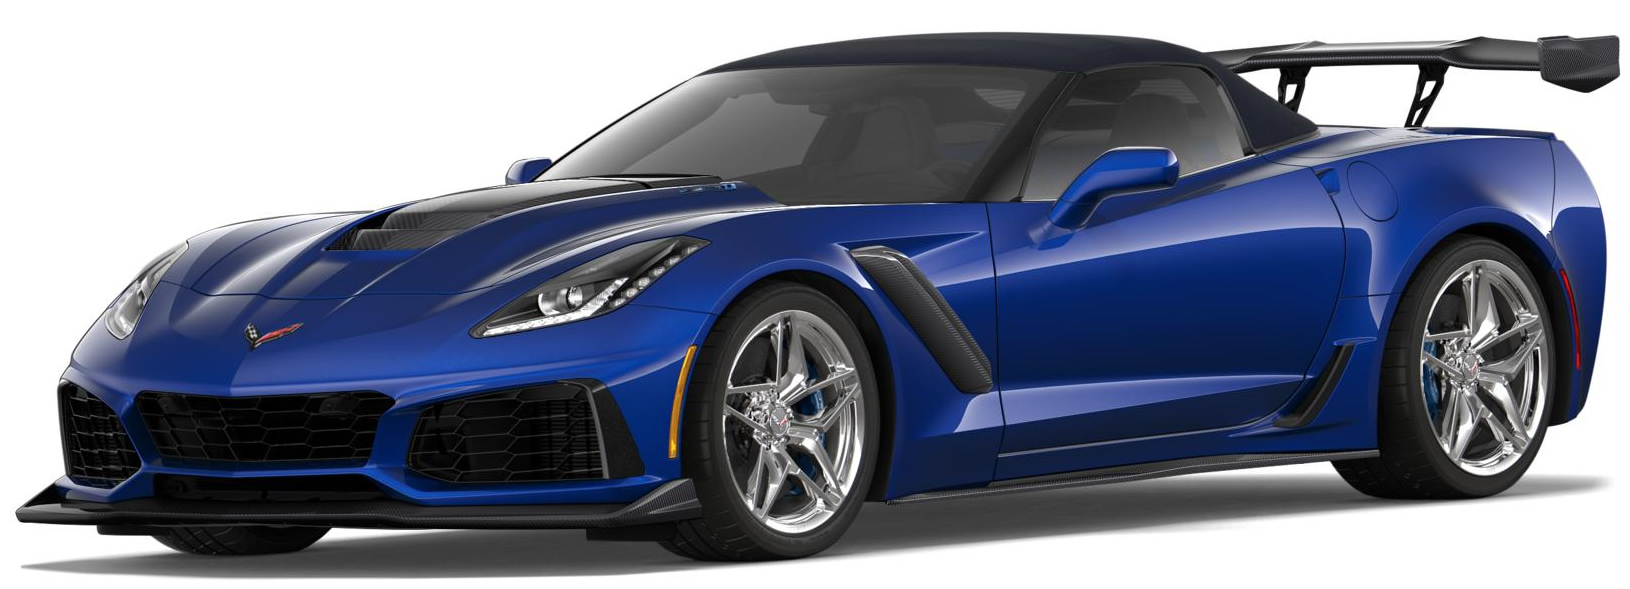 2019 Corvette ZR1 Convertible in Admiral Blue Metallic with the ZTK Track Performance Package and Chrome Wheels